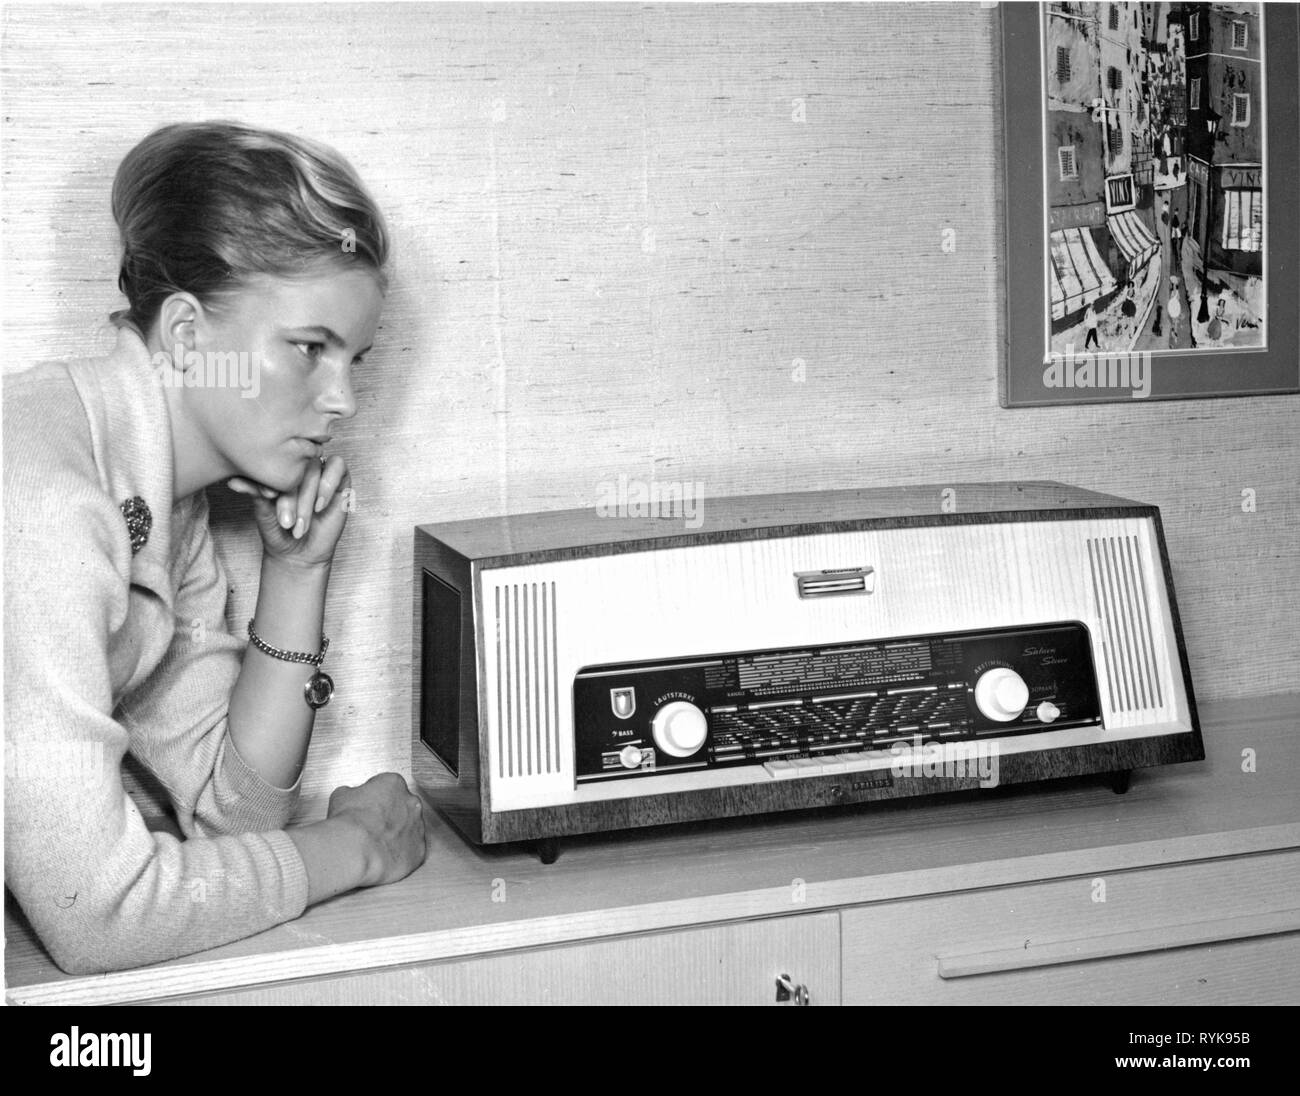 Broadcast, radio, apparecchi radio, Philips Saturno 511 stereo 5 B5D11A, Germania, 1961, Additional-Rights-Clearance-Info-Not-Available Foto Stock